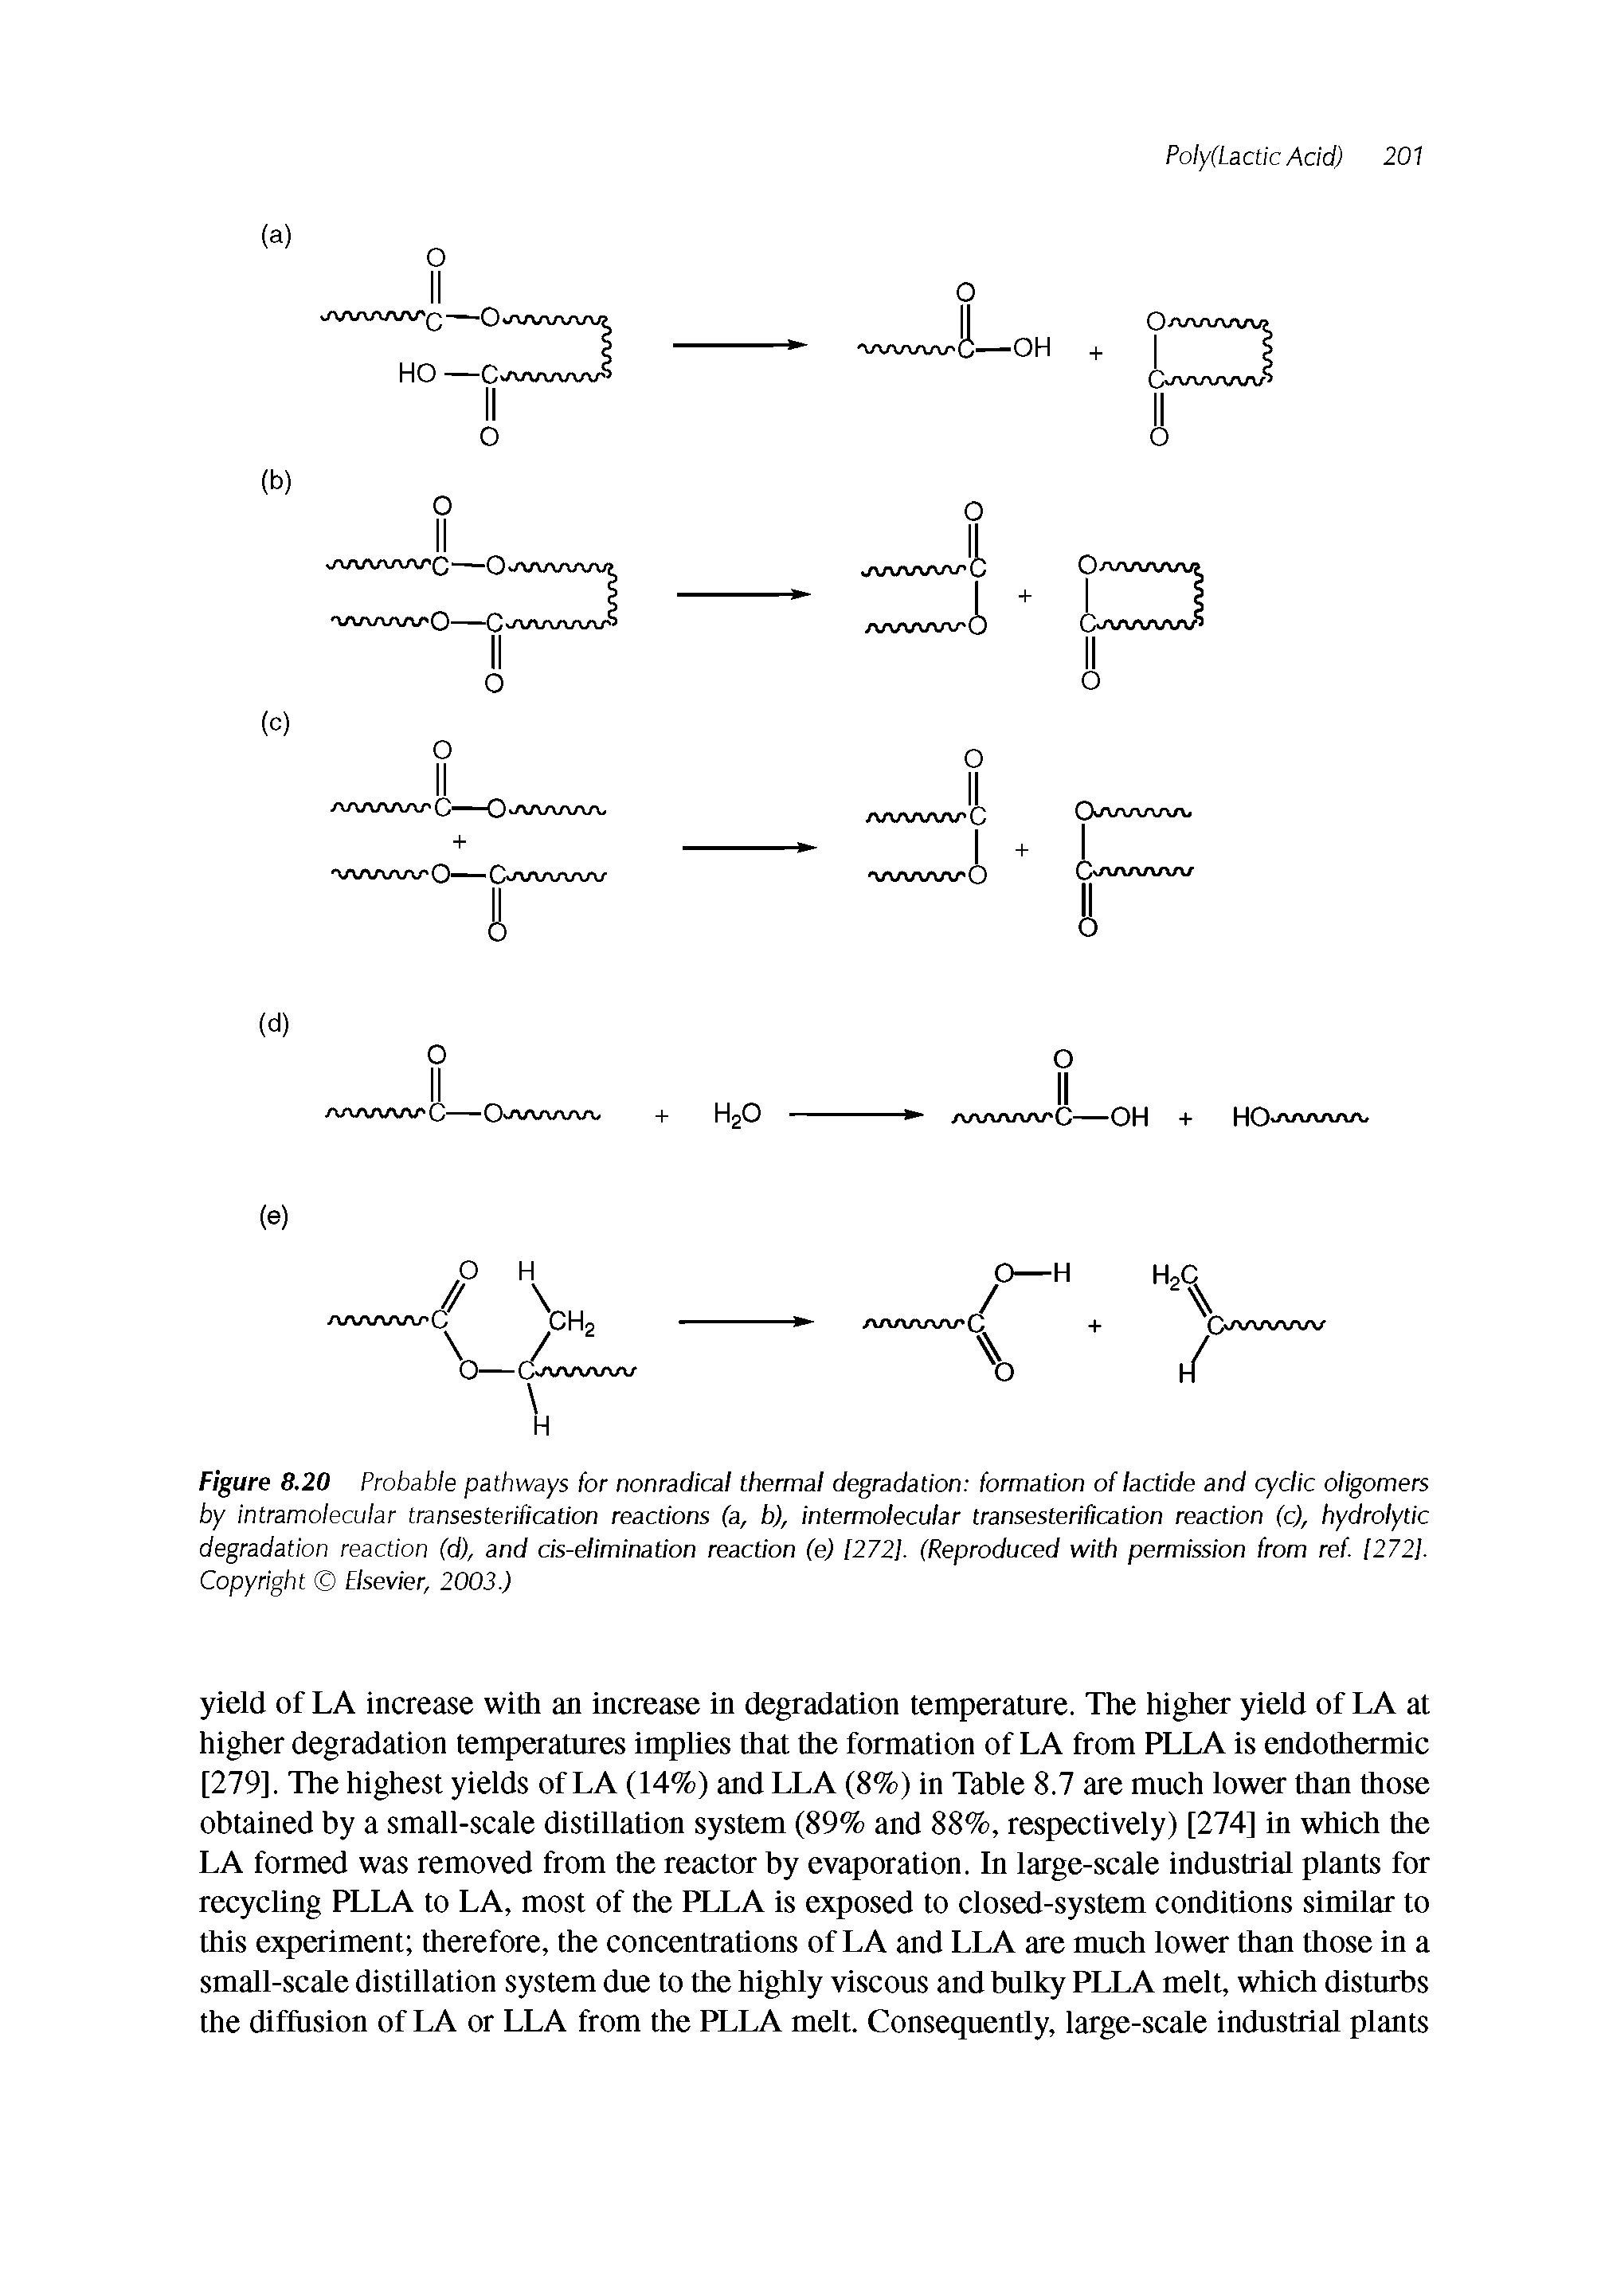 Figure 8.20 Probable pathways for nonradical thermal degradation formation oflactide and cyclic oligomers by intramolecular transesterification reactions (a, b), intermolecular transesterification reaction (c), hydrolytic degradation reaction (d), and cis-elimination reaction (e) [2721. (Reproduced with permission from ref [272]. Copyright Elsevier, 2003.)...